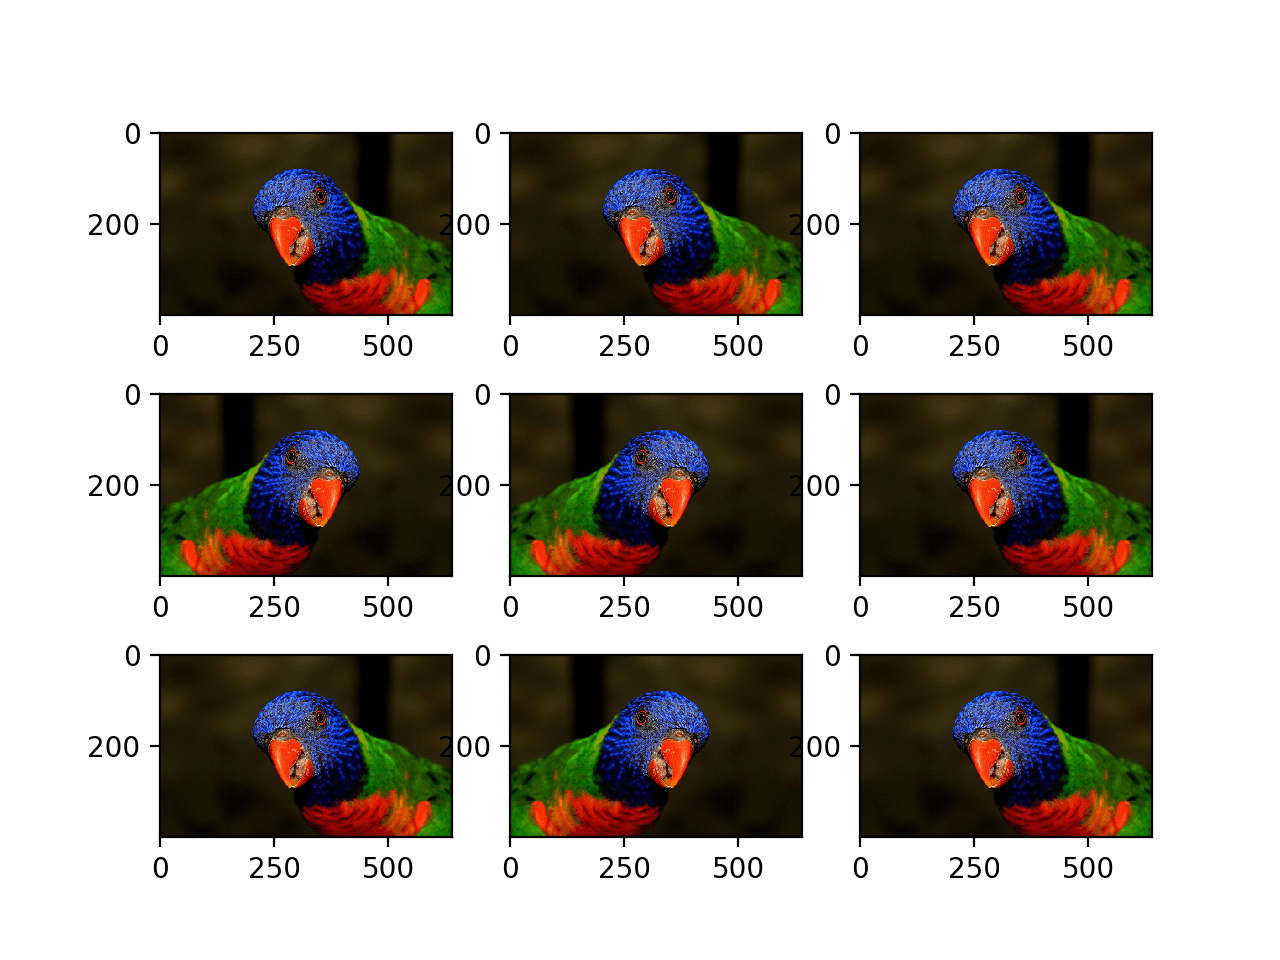 Plot of Augmented Images With a Random Horizontal Flip